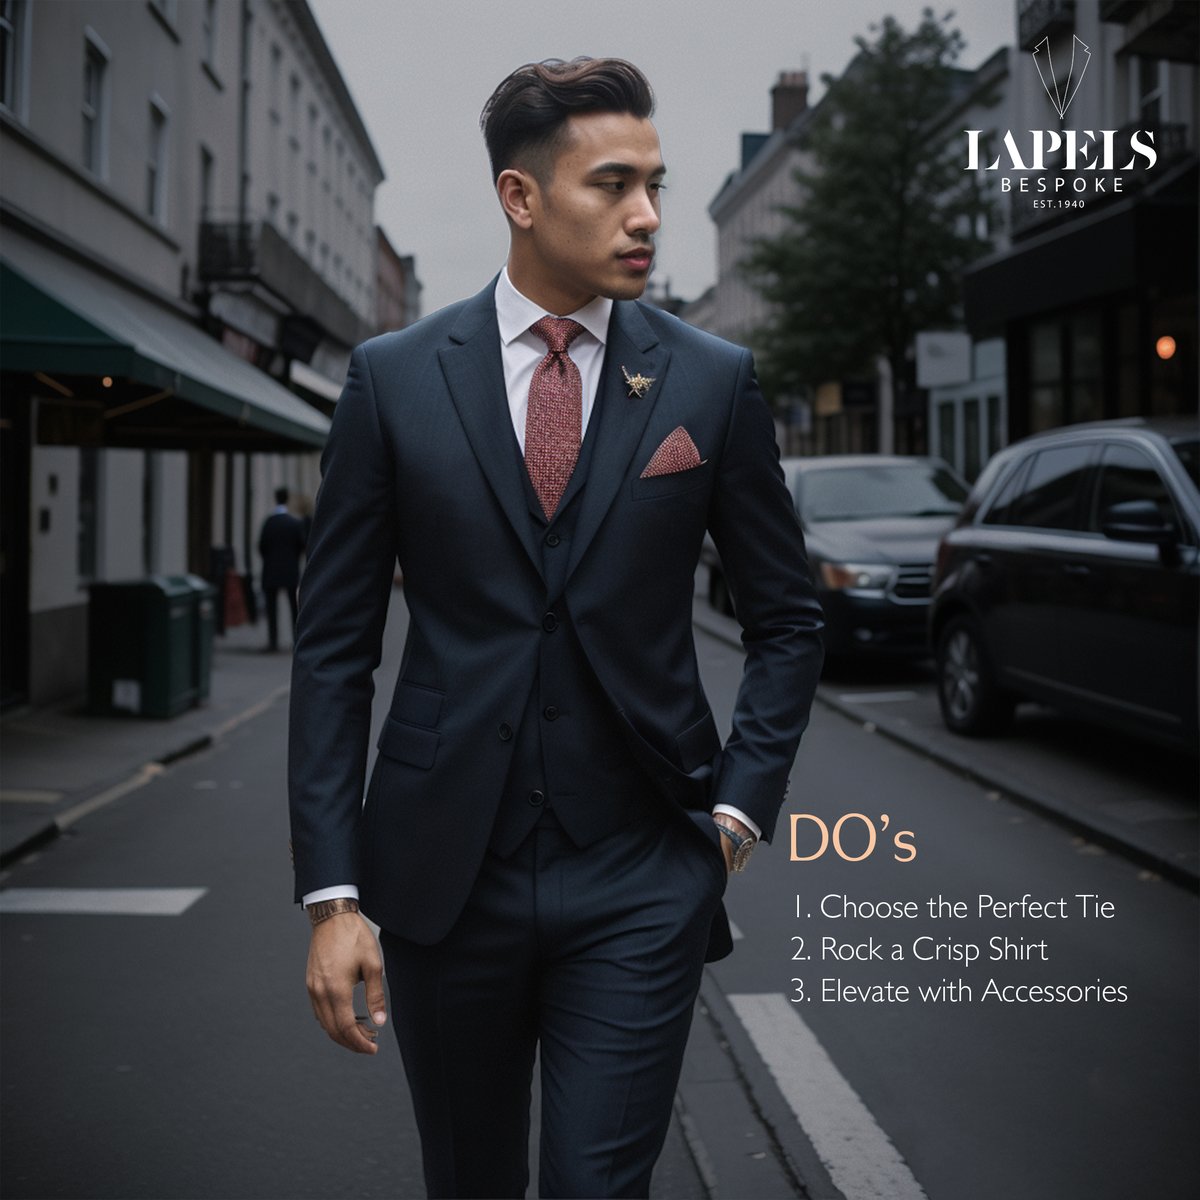 Lapels 101 style guide on mastering the art of suiting up for business occasions.
#SuitUpMastery #DapperDressing #SuitsAndStyle #SartorialSkills #Suitspiration #LapelsBespoke